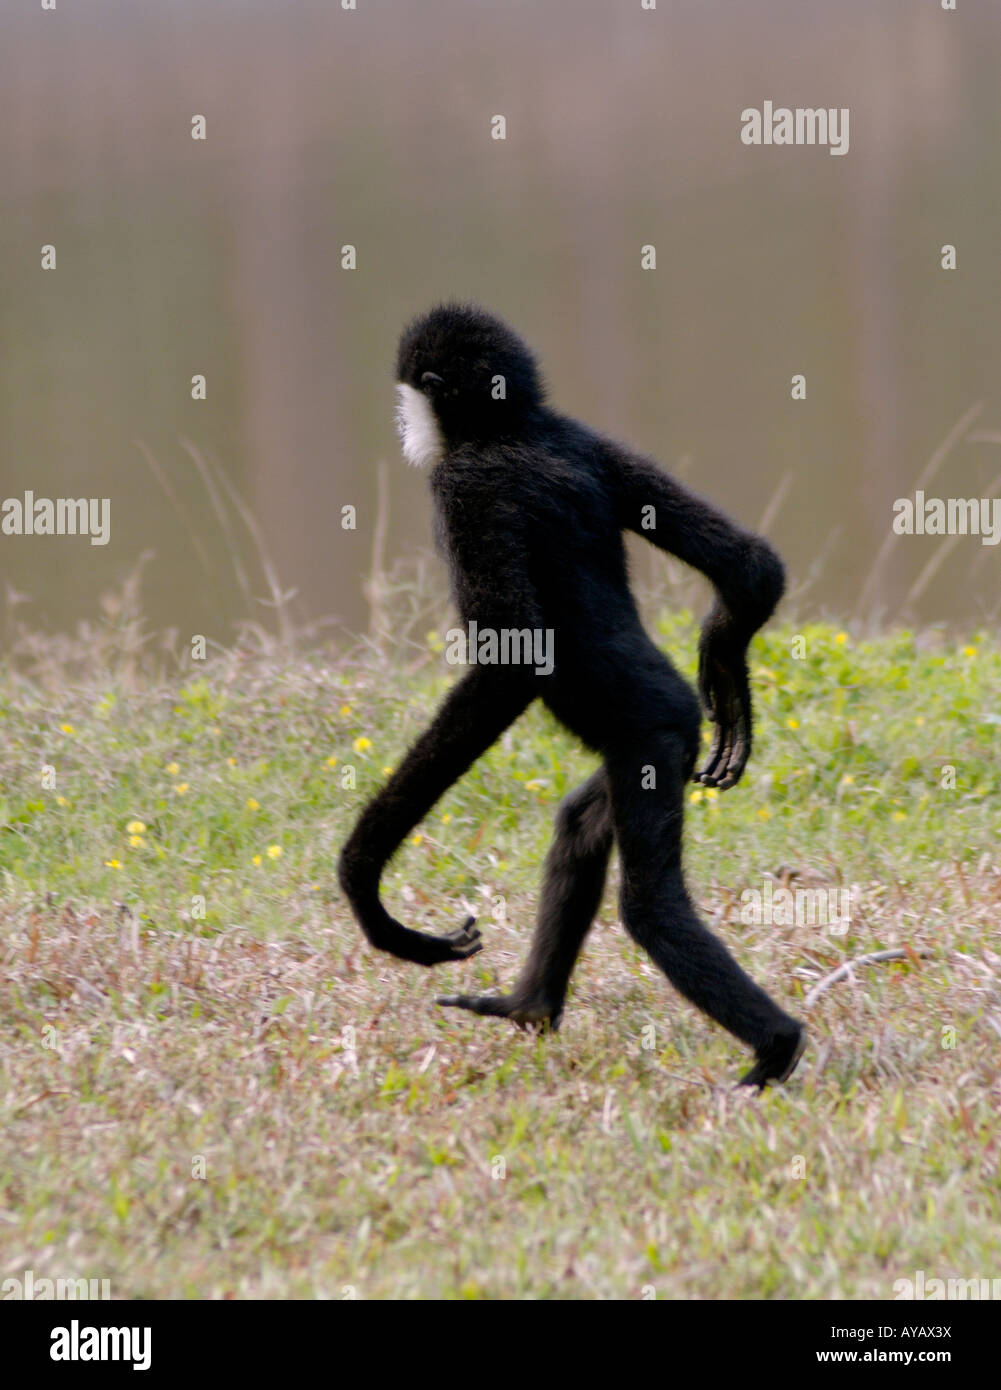 Chinese white cheeked gibbon Hylobates leucigenys H concolor walking bipedally showing outssized arms Stock Photo